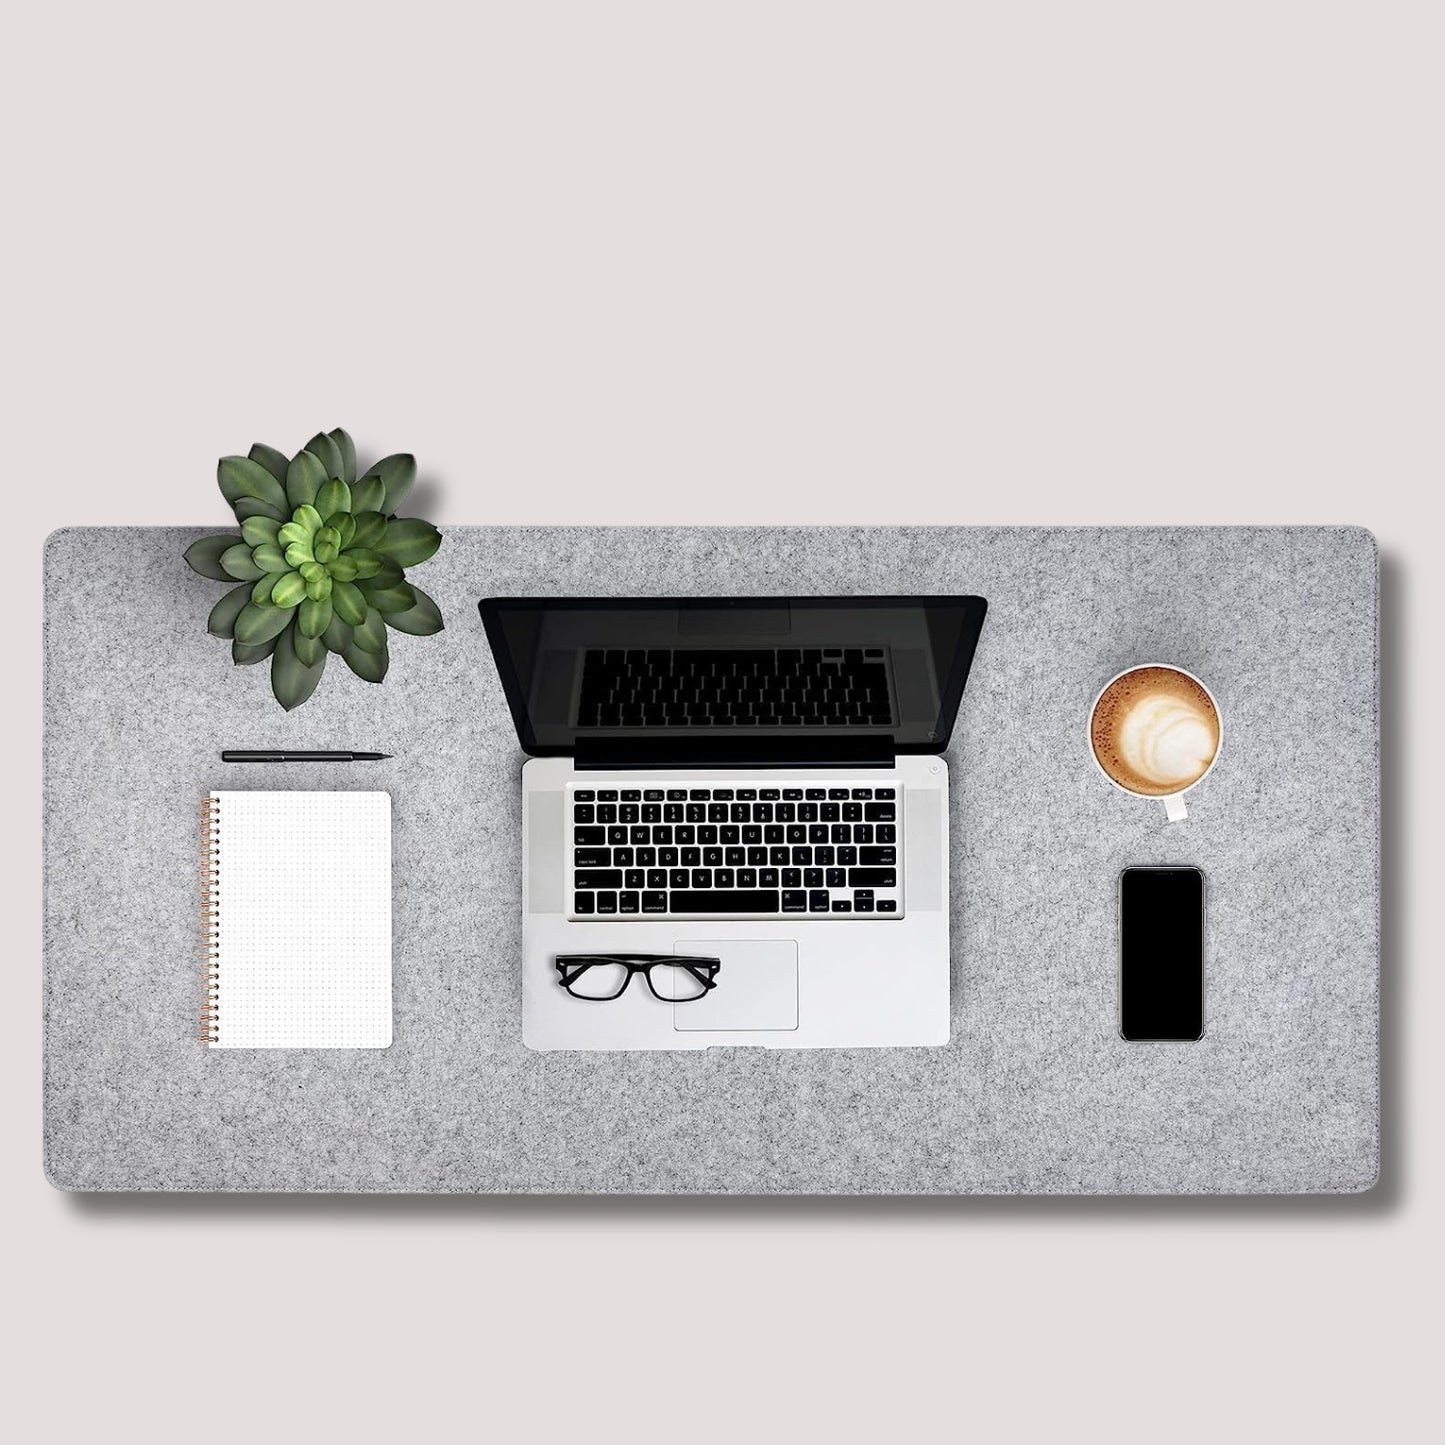 Tierno Combo of 3 Pack (1 Felt Desk Pad,1 Felt Tray,4 Felt Coster) Daily Objects Desk Pad Super Smooth Felt for Gaming,1 Desk Mat, 1 Felt Tray,Felt Coaster Set of 4 (Light Gray Colored)